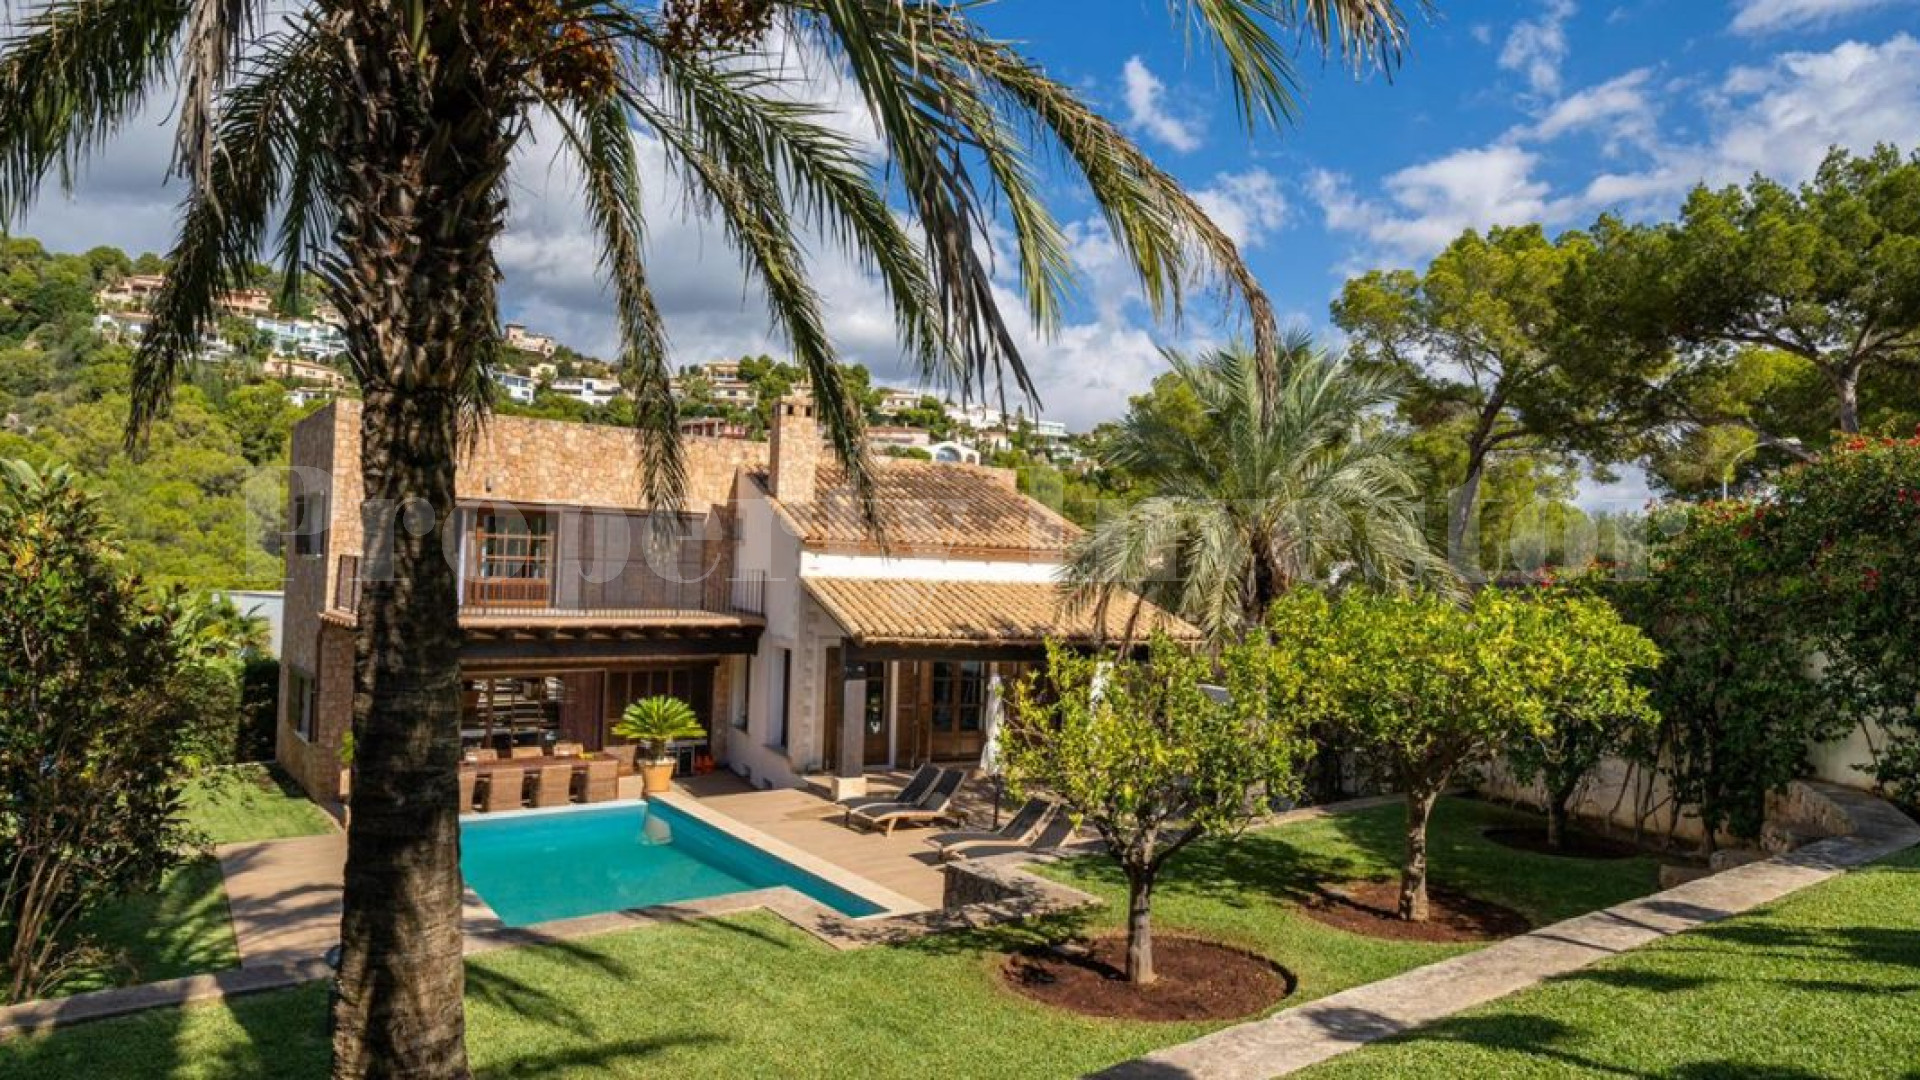 Lovely 4 Bedroom Traditional Mediterranean Style Villa For Sale in Portals Nous, Mallorca